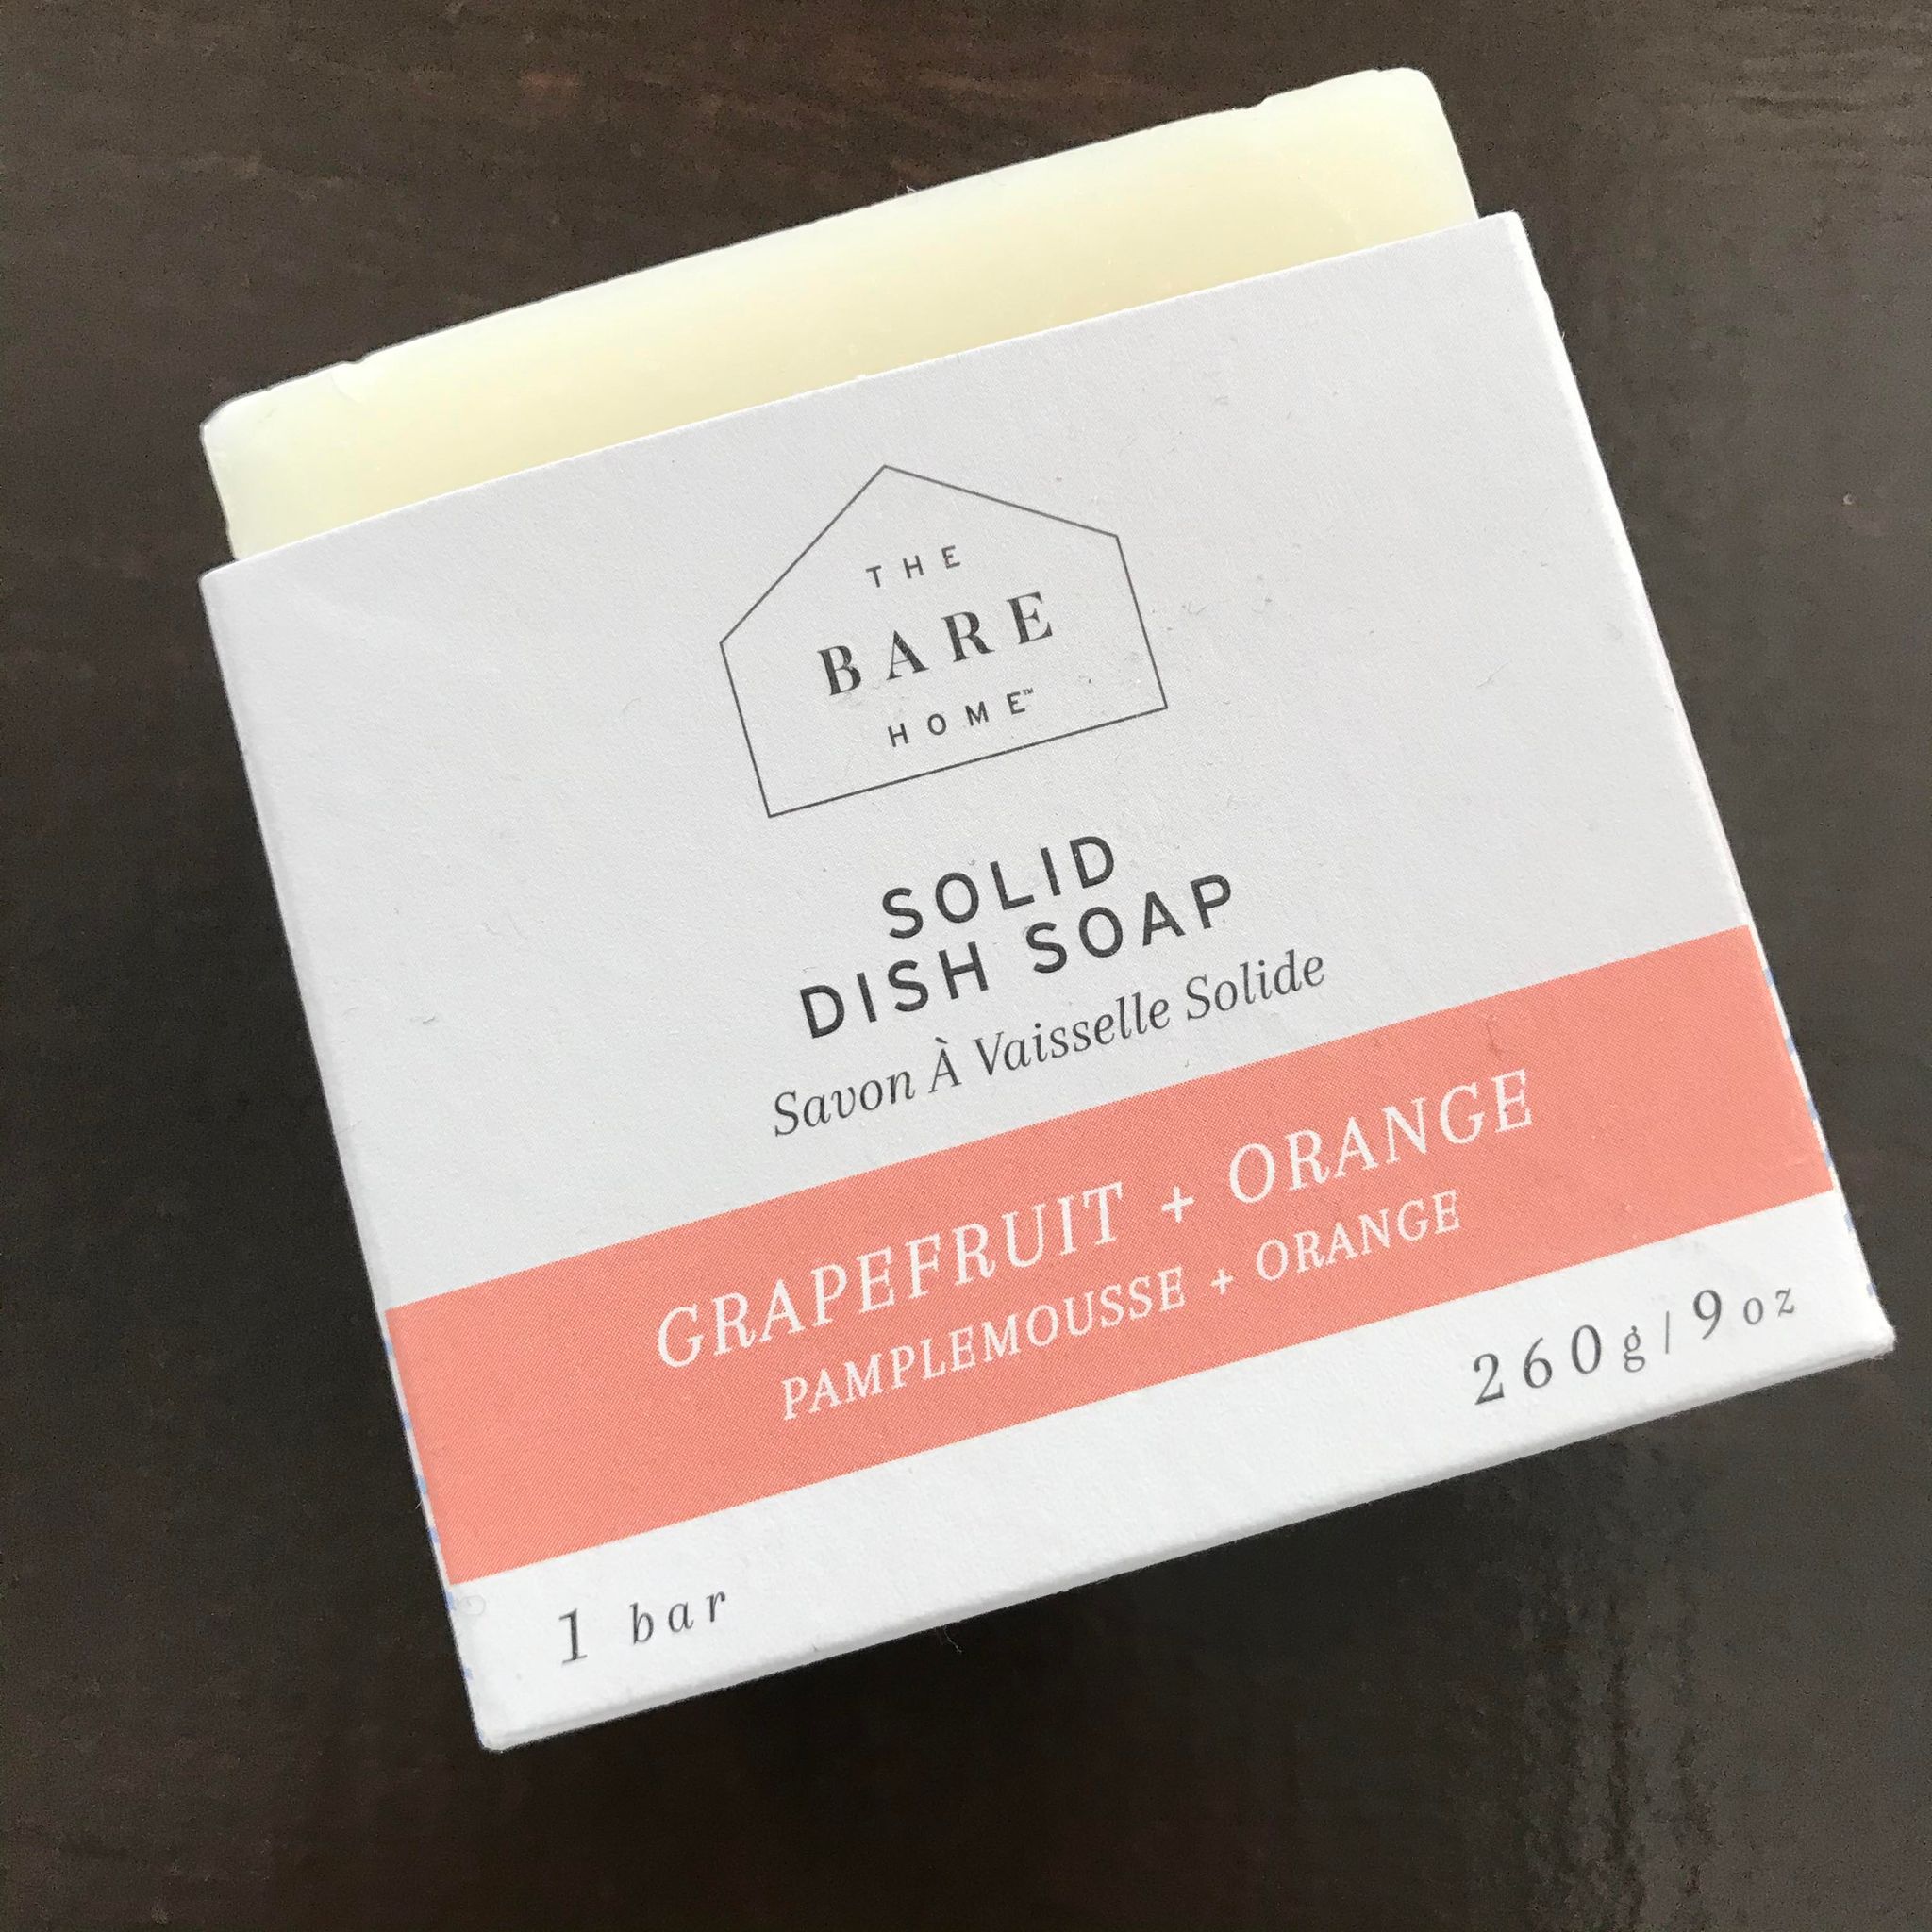 The plant powered suds in this solid dish soap grapefruit and orange dish soap made in canada by the bare home are tough enough to cut stubborn grease and baked on food.